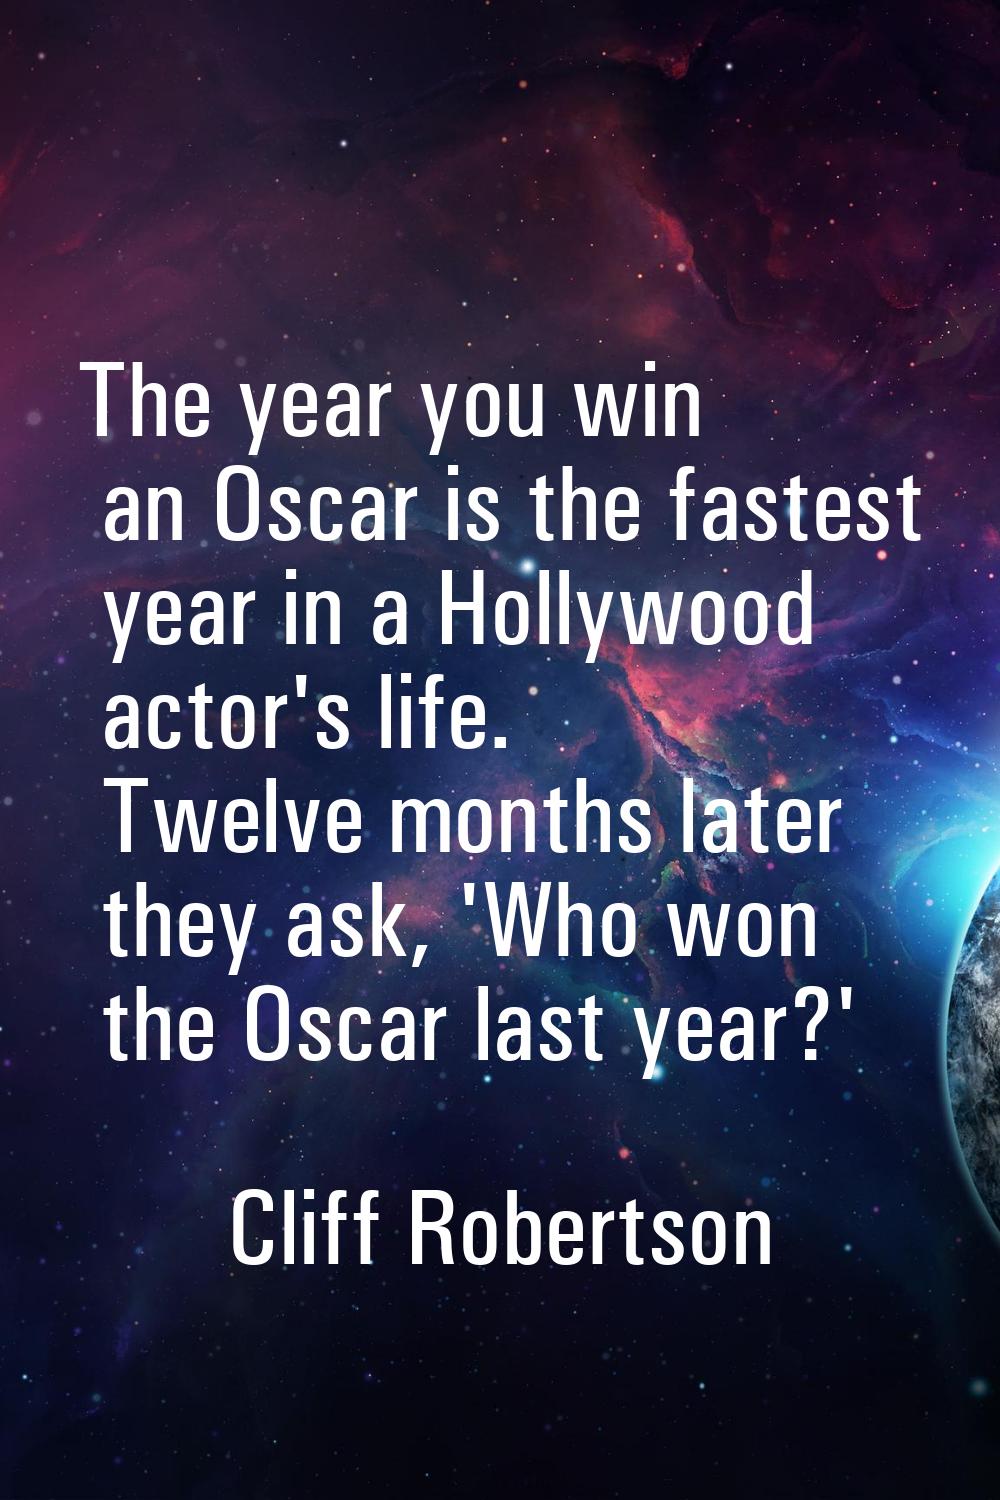 The year you win an Oscar is the fastest year in a Hollywood actor's life. Twelve months later they